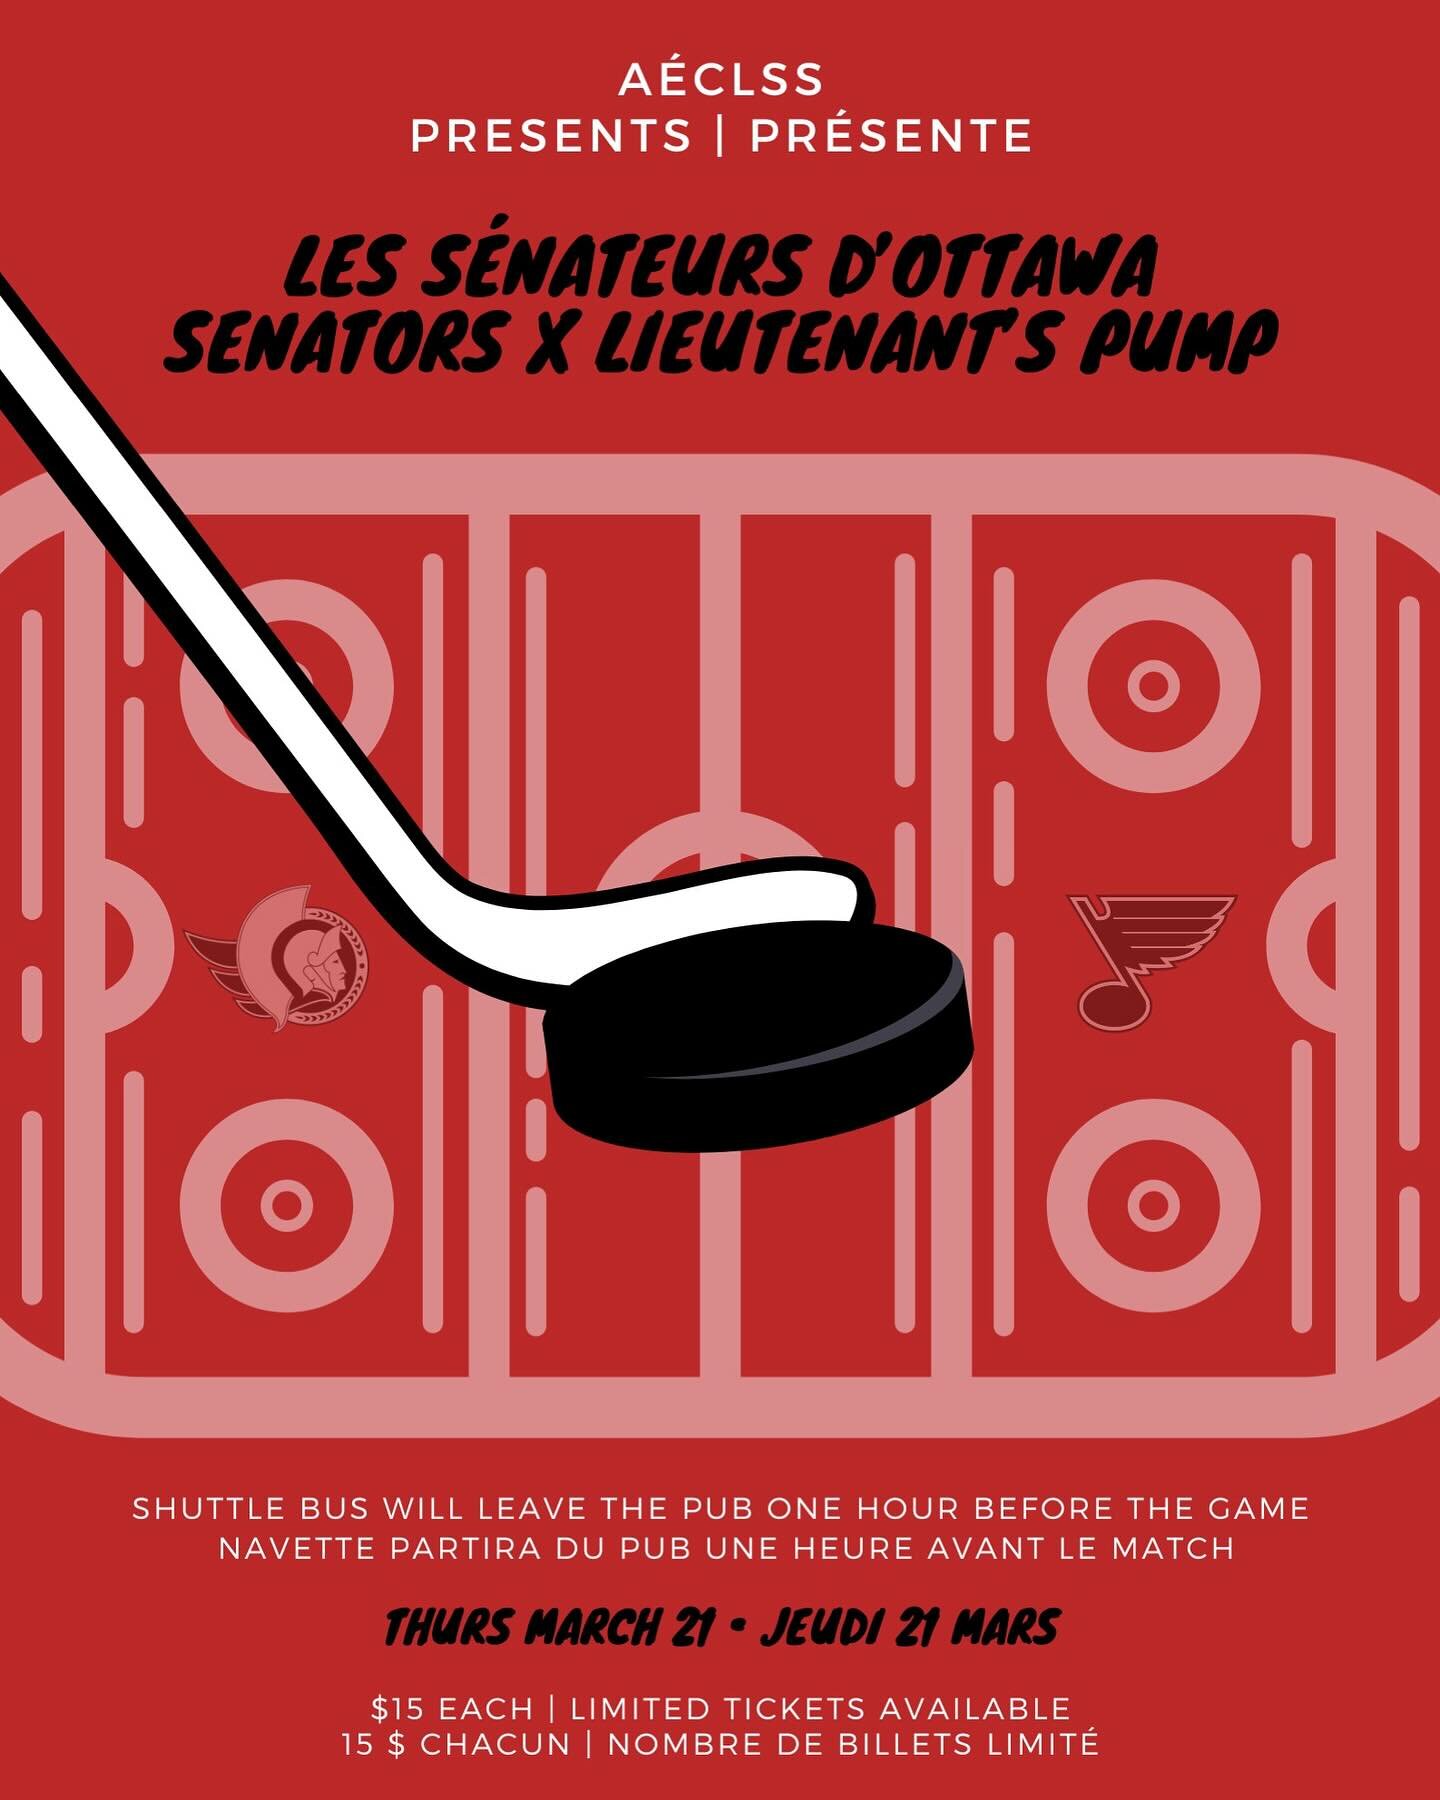 A&Eacute;CLSS has reserved 40 tickets for law students to the March 21st Ottawa Senators game vs the St. Louis Blues. 🏒

The event is in collaboration with Lieutenant&rsquo;s Pump. We invite you to meet at the pub before the game and some post-game 